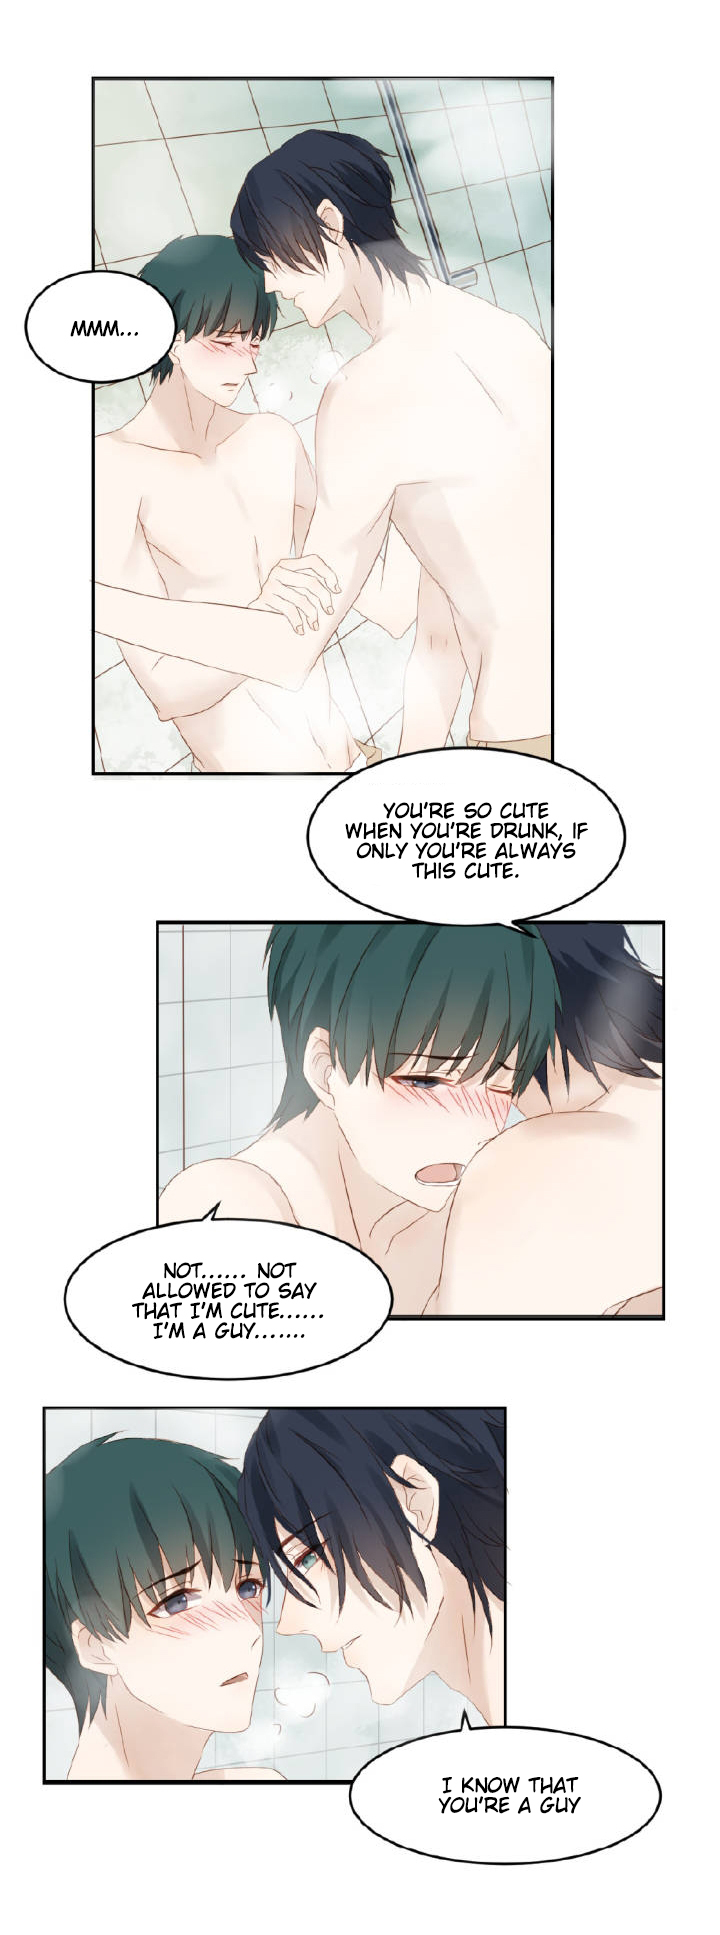 Fragile Relationship Vol. 1 Ch. 12 Want To Try It With Me?